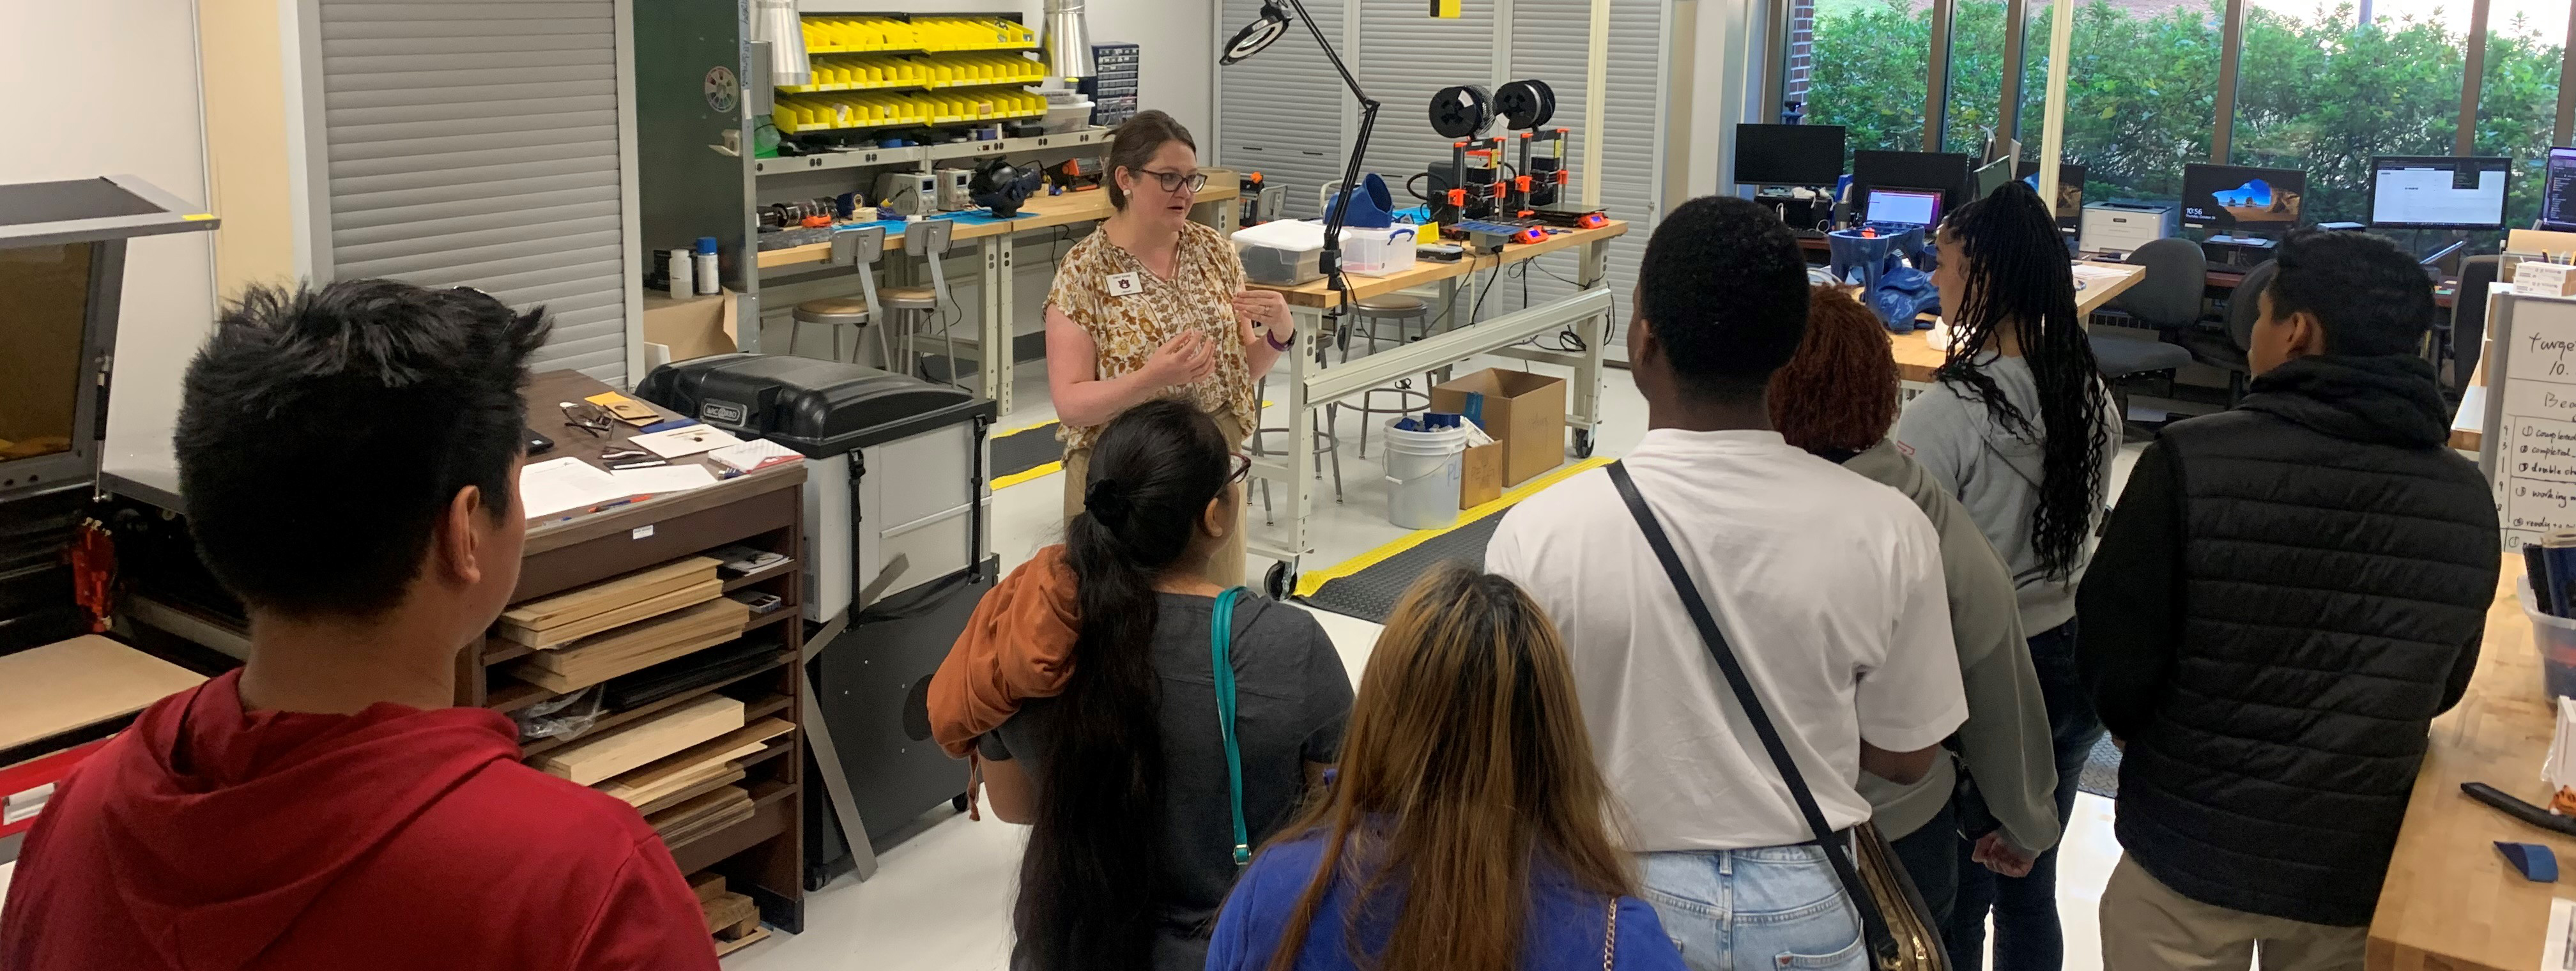 A female presenter speaks to a group of male and female students in a makers space lab